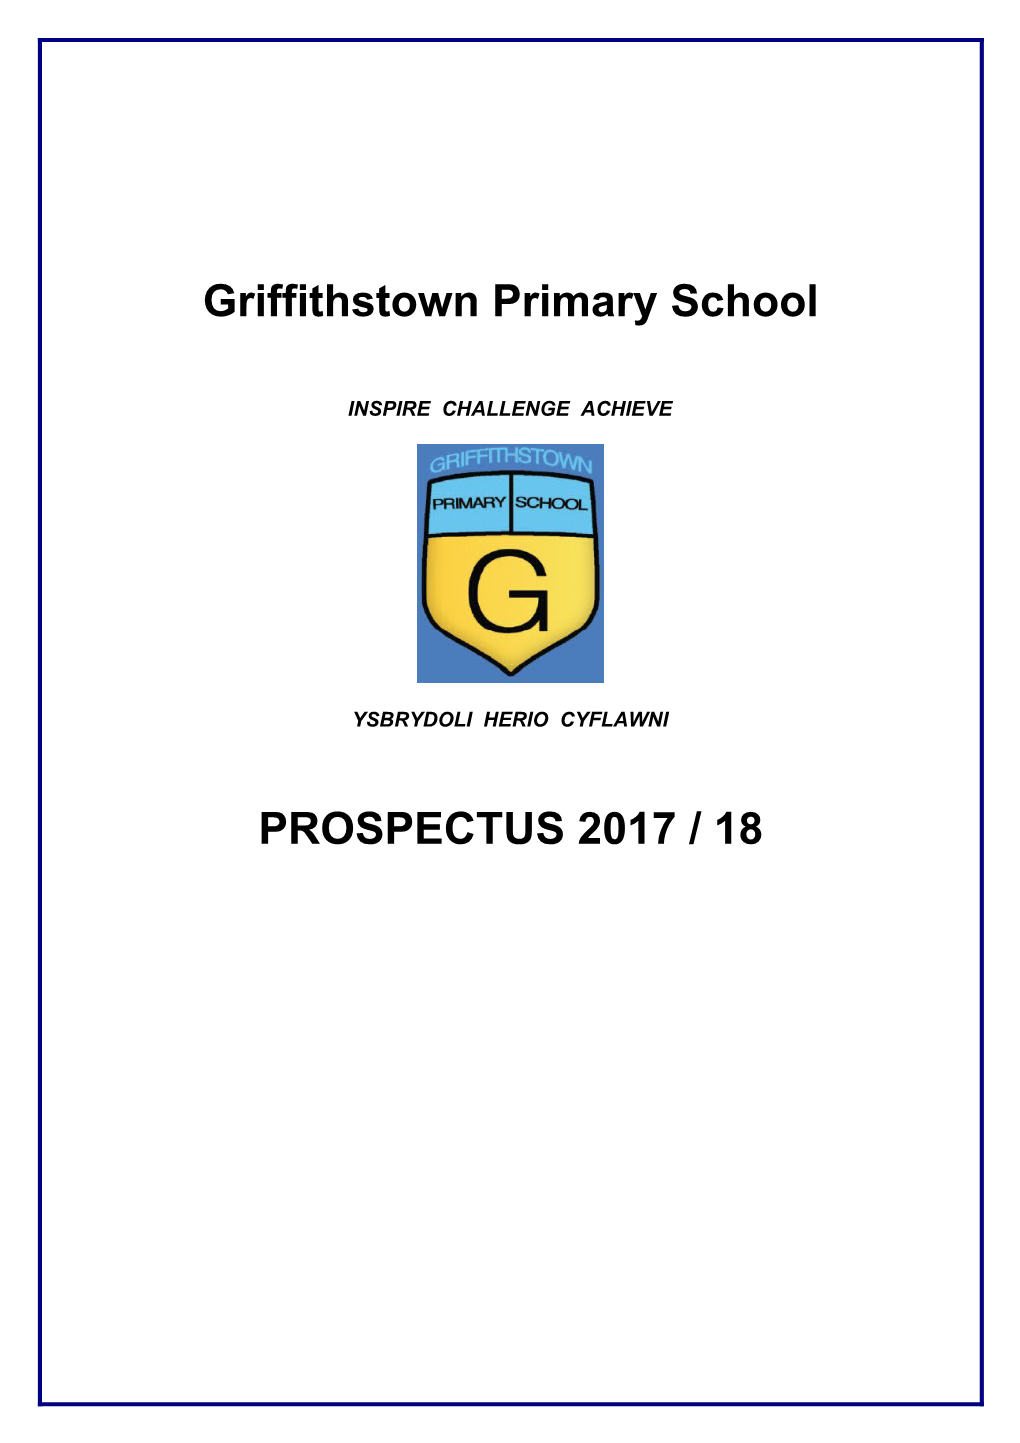 Griffithstown Primary School